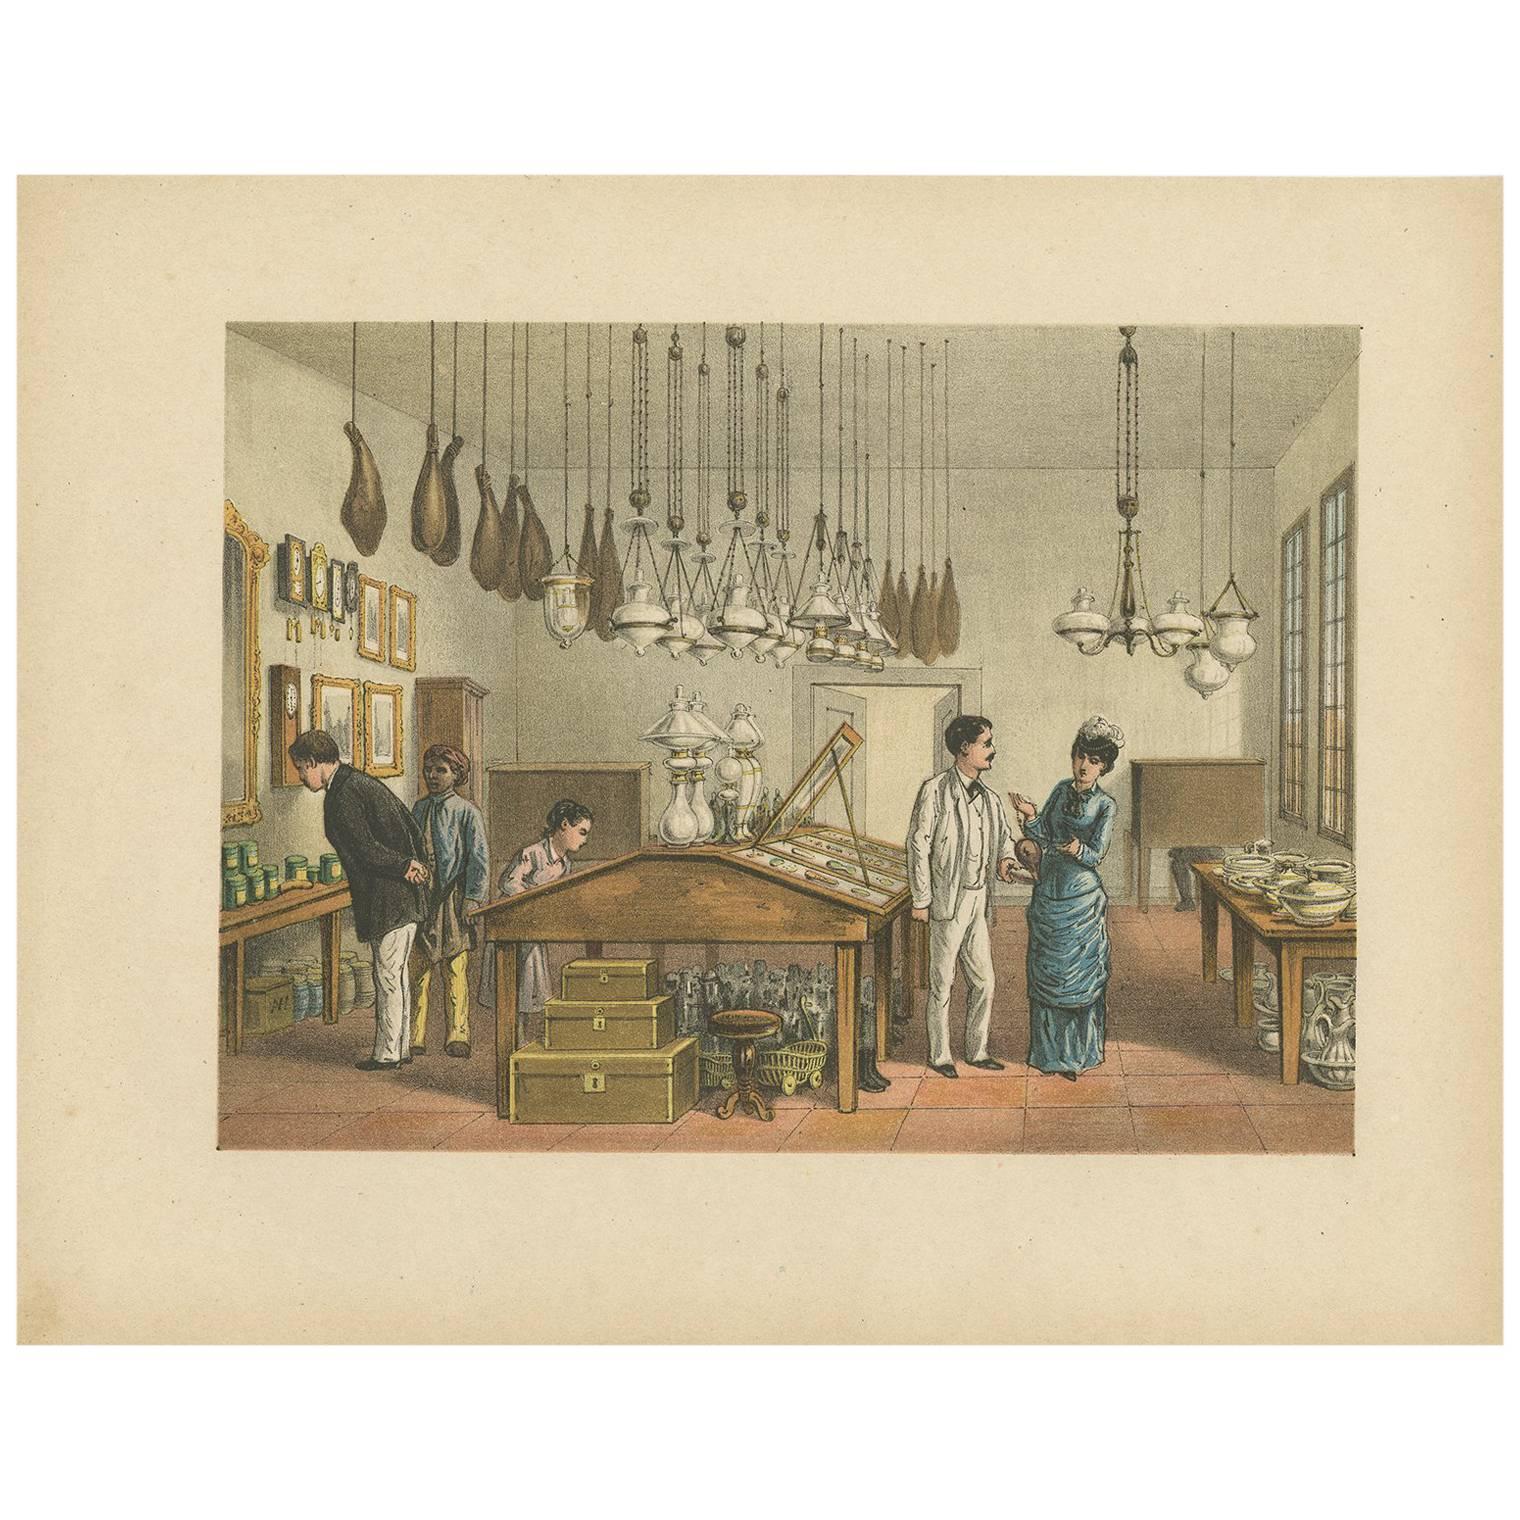 Antique Print of a Store in Batavia 'Indonesia' by M.T.H. Perelaer, 1888